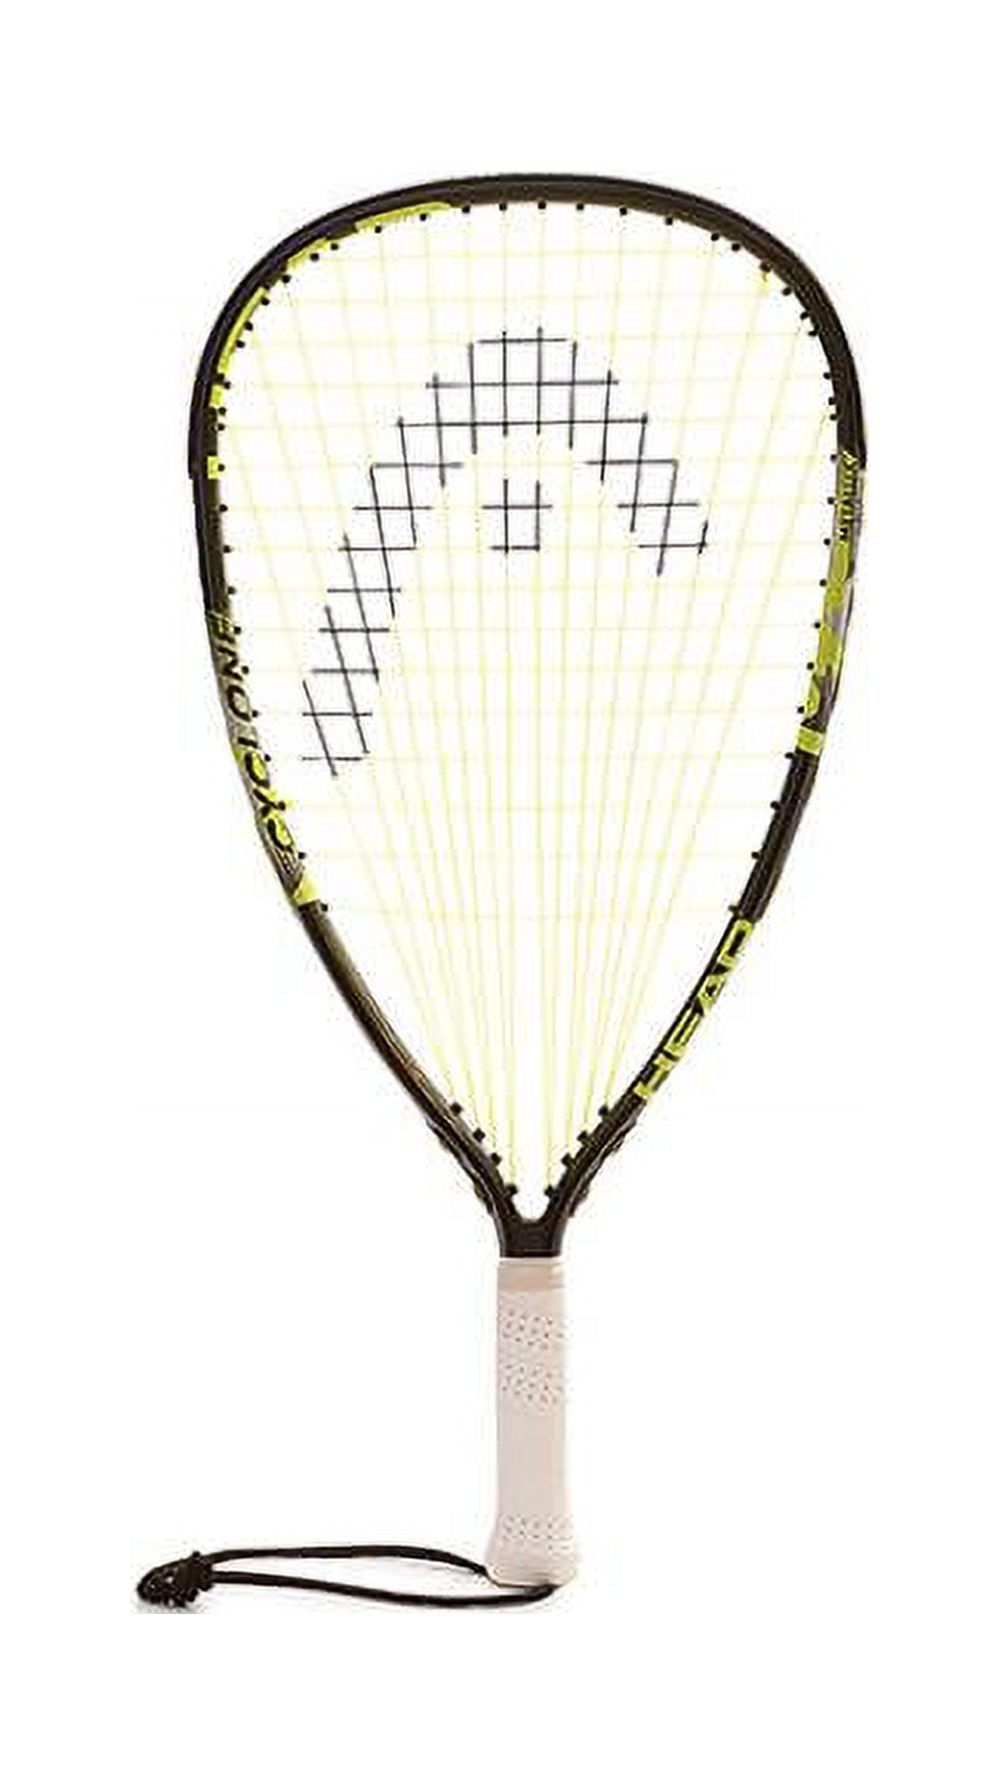 HEAD MX Cyclone Racquetball Racquet, 107 sq. in. Head Size, Black/Yellow, 6.5 Ounces - image 1 of 2